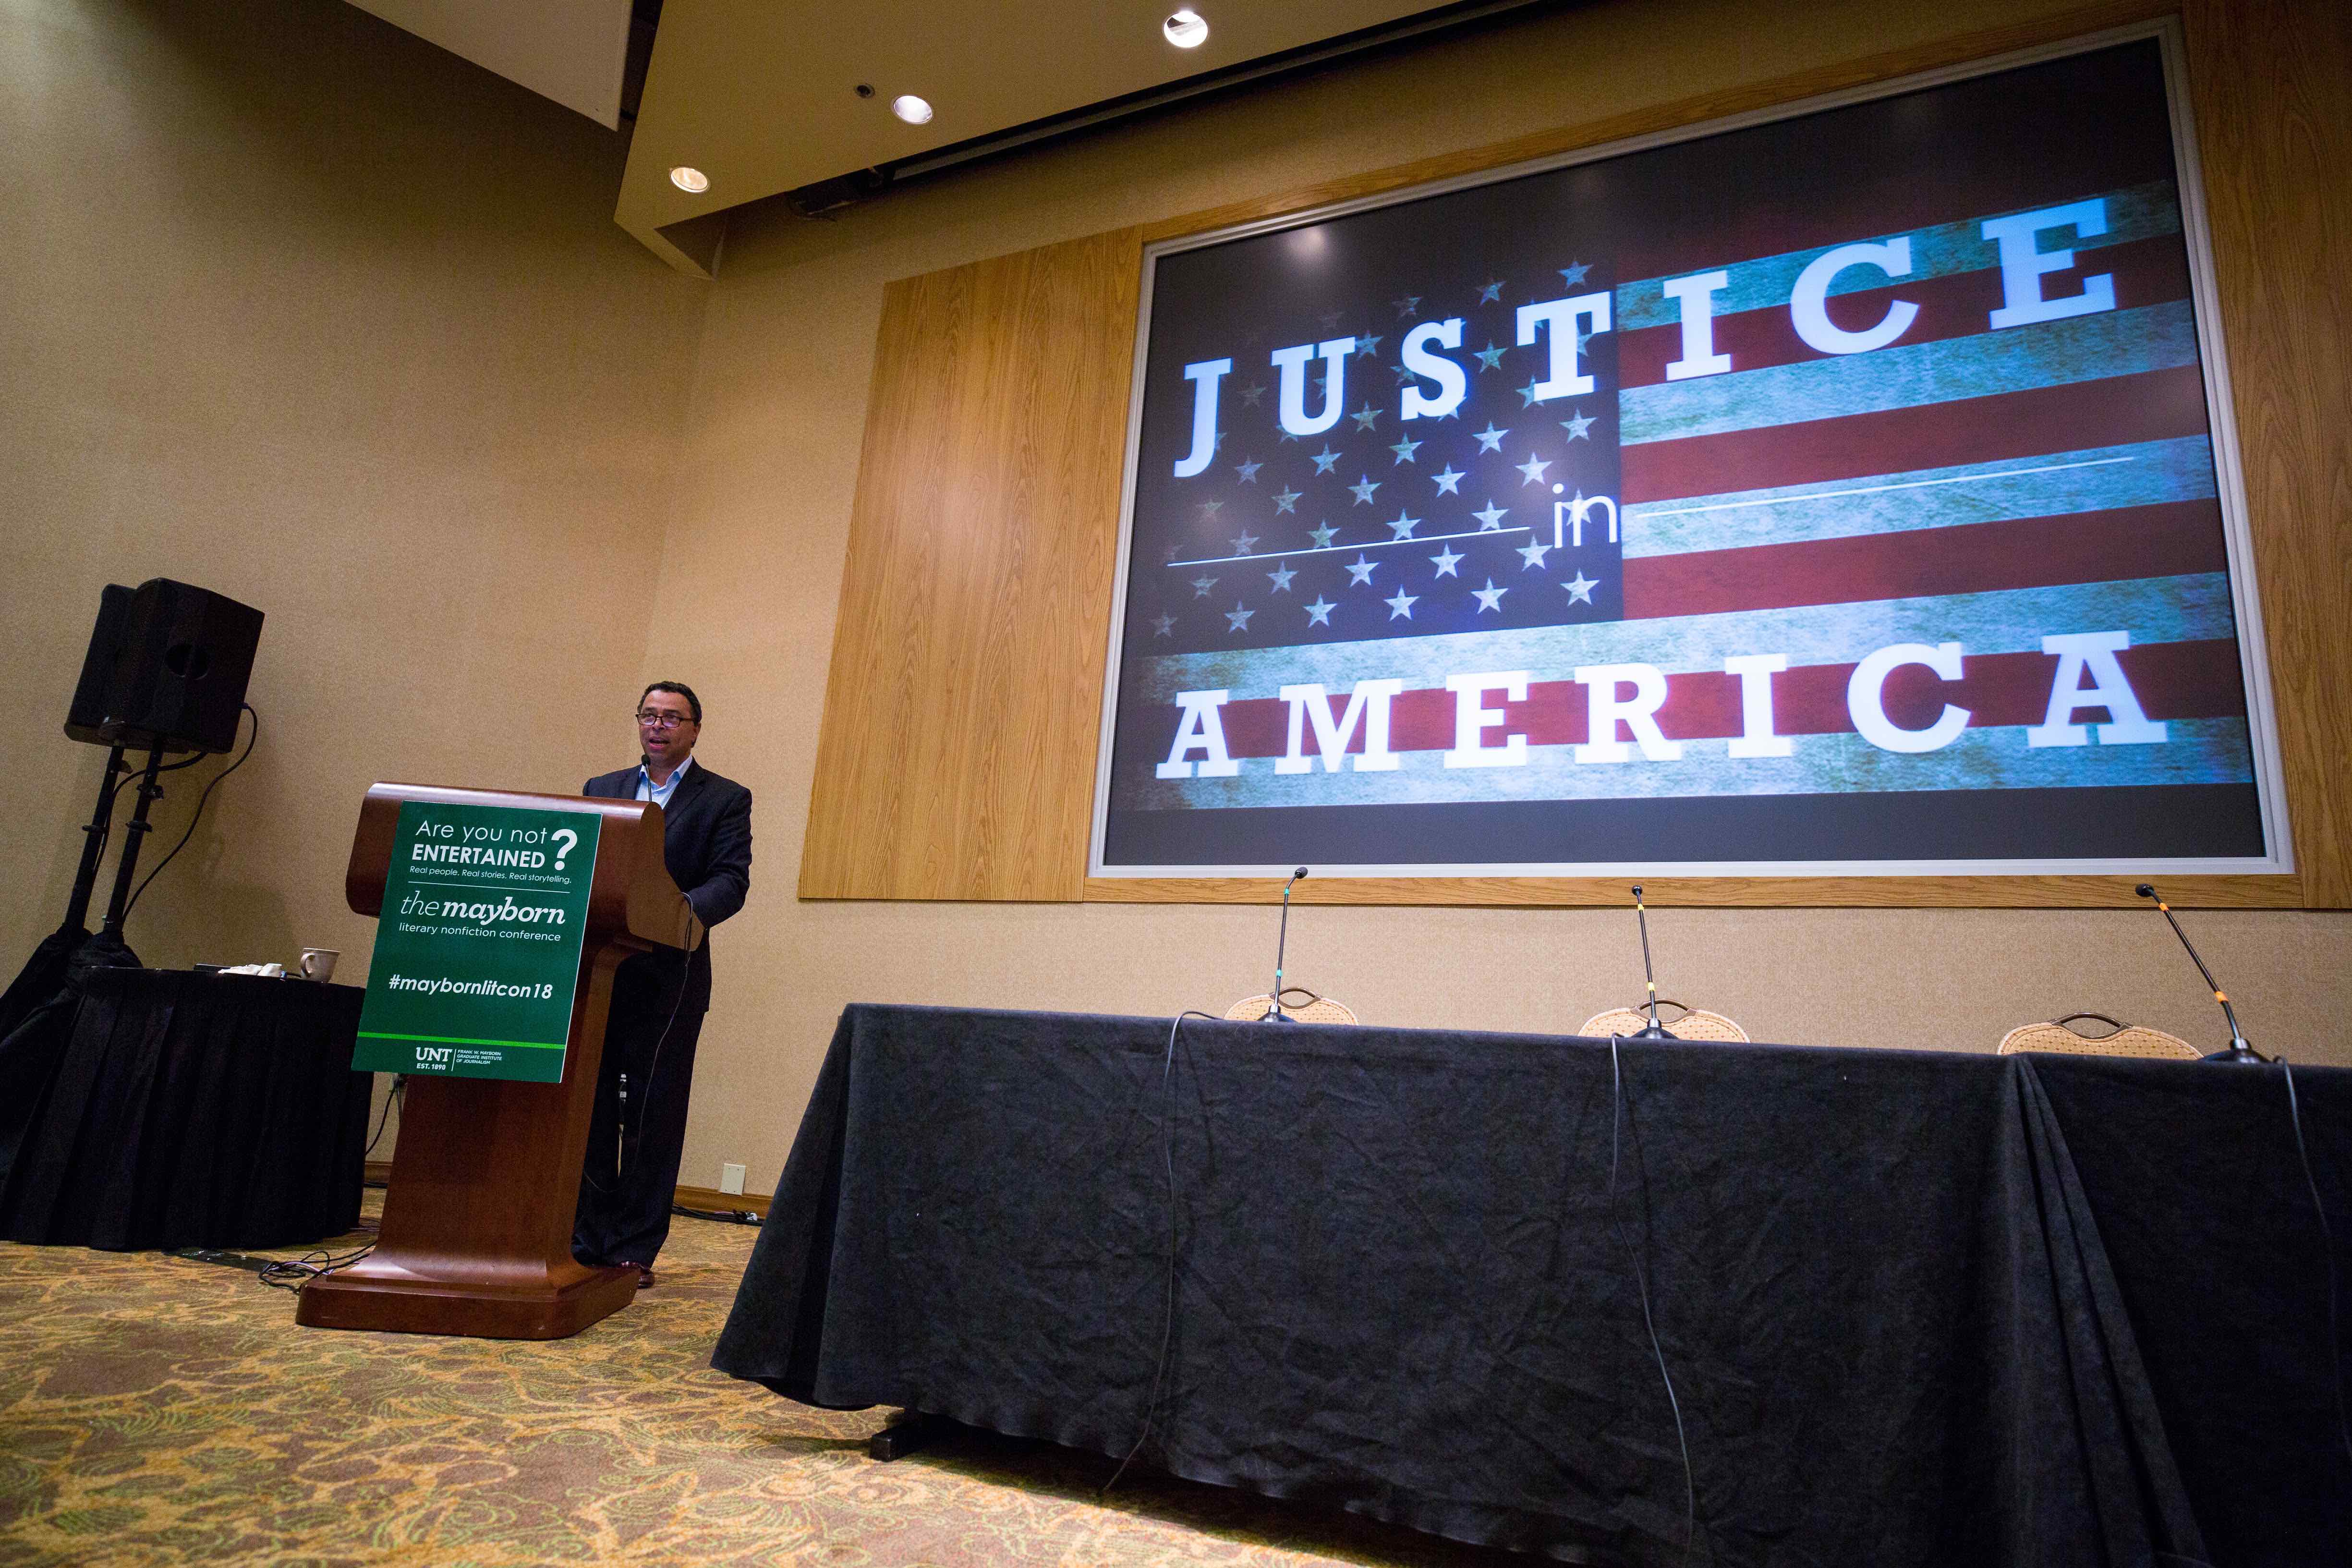 2018 Mayborn Conferen organizer Neil Foote stands next to a power point/banner presenting the (now) current theme: Justice in America